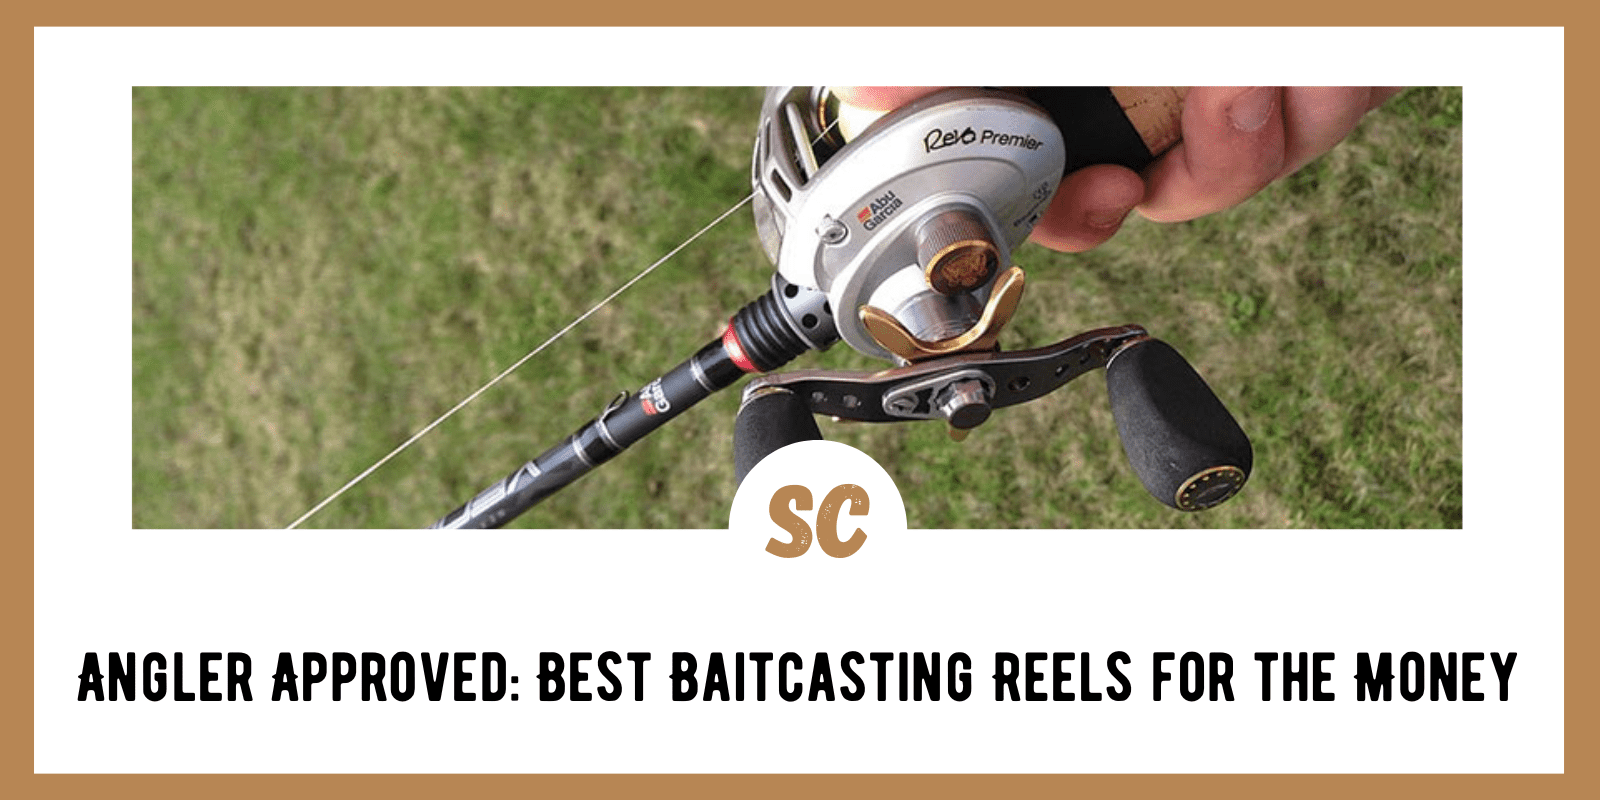 https://survivalcache.com/wp-content/uploads/2022/06/Angler-Approved-Best-Baitcasting-Reels-for-the-Money.png